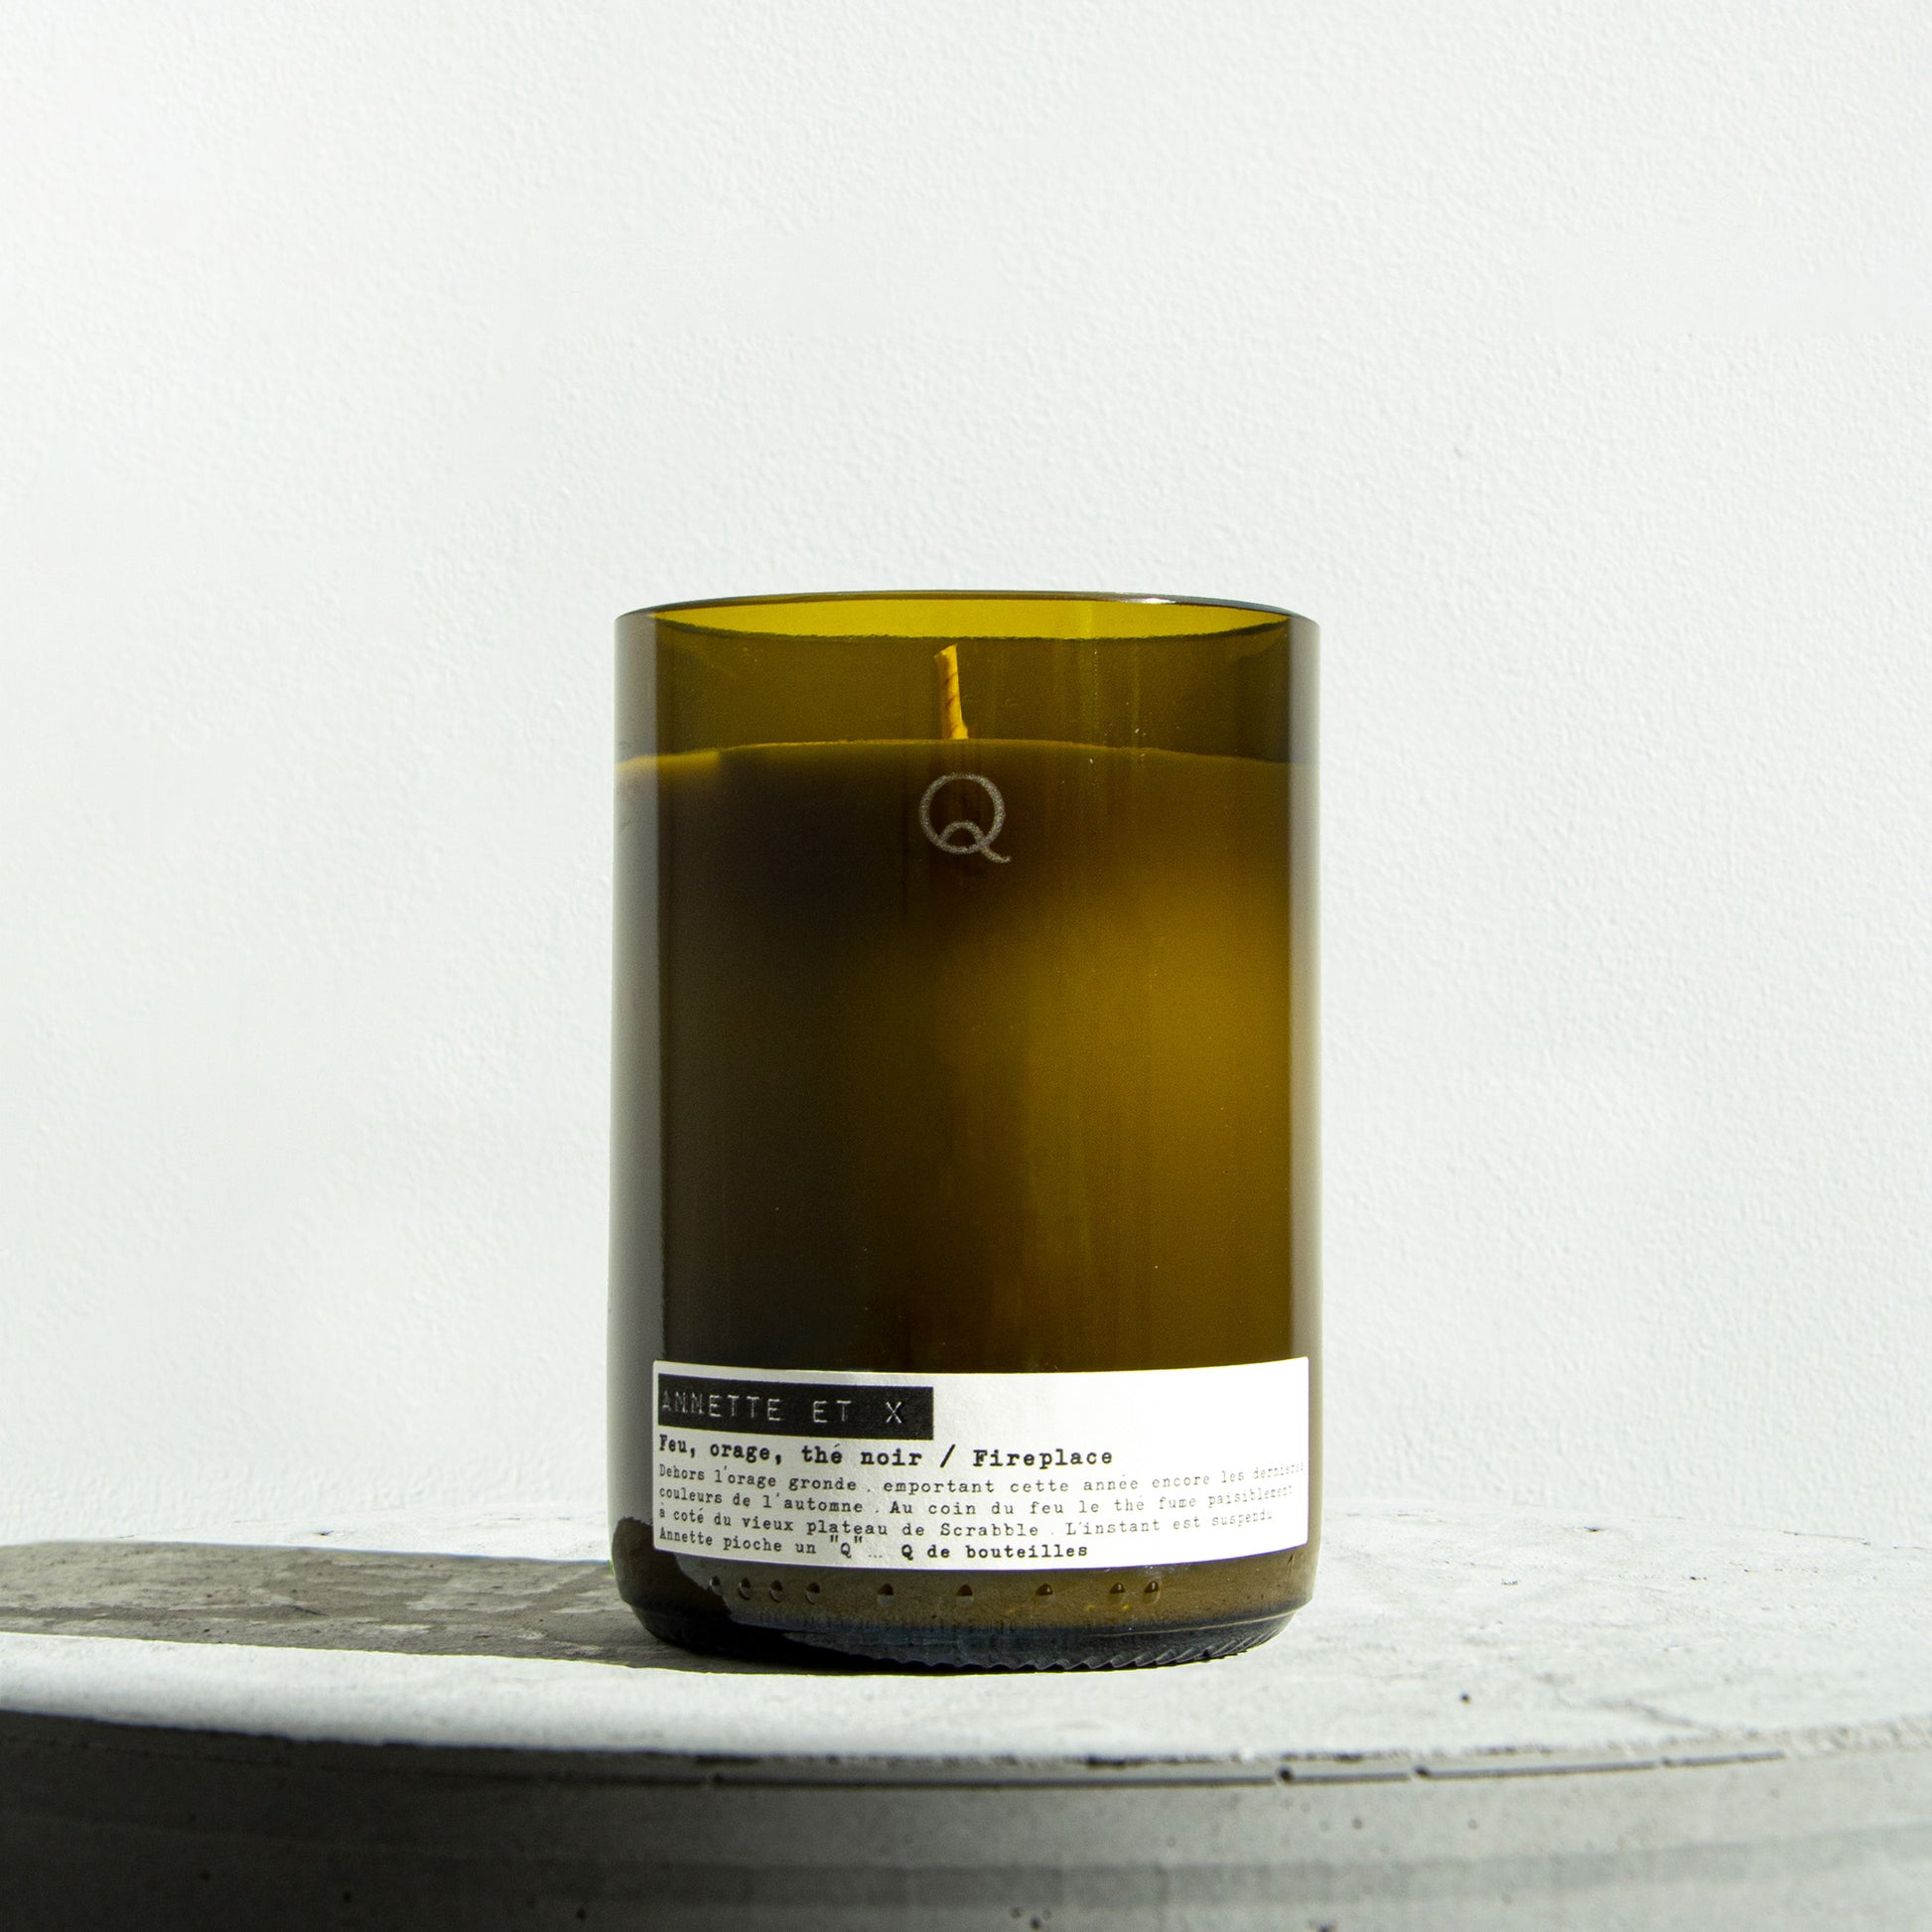 Scented candle - Annette & X